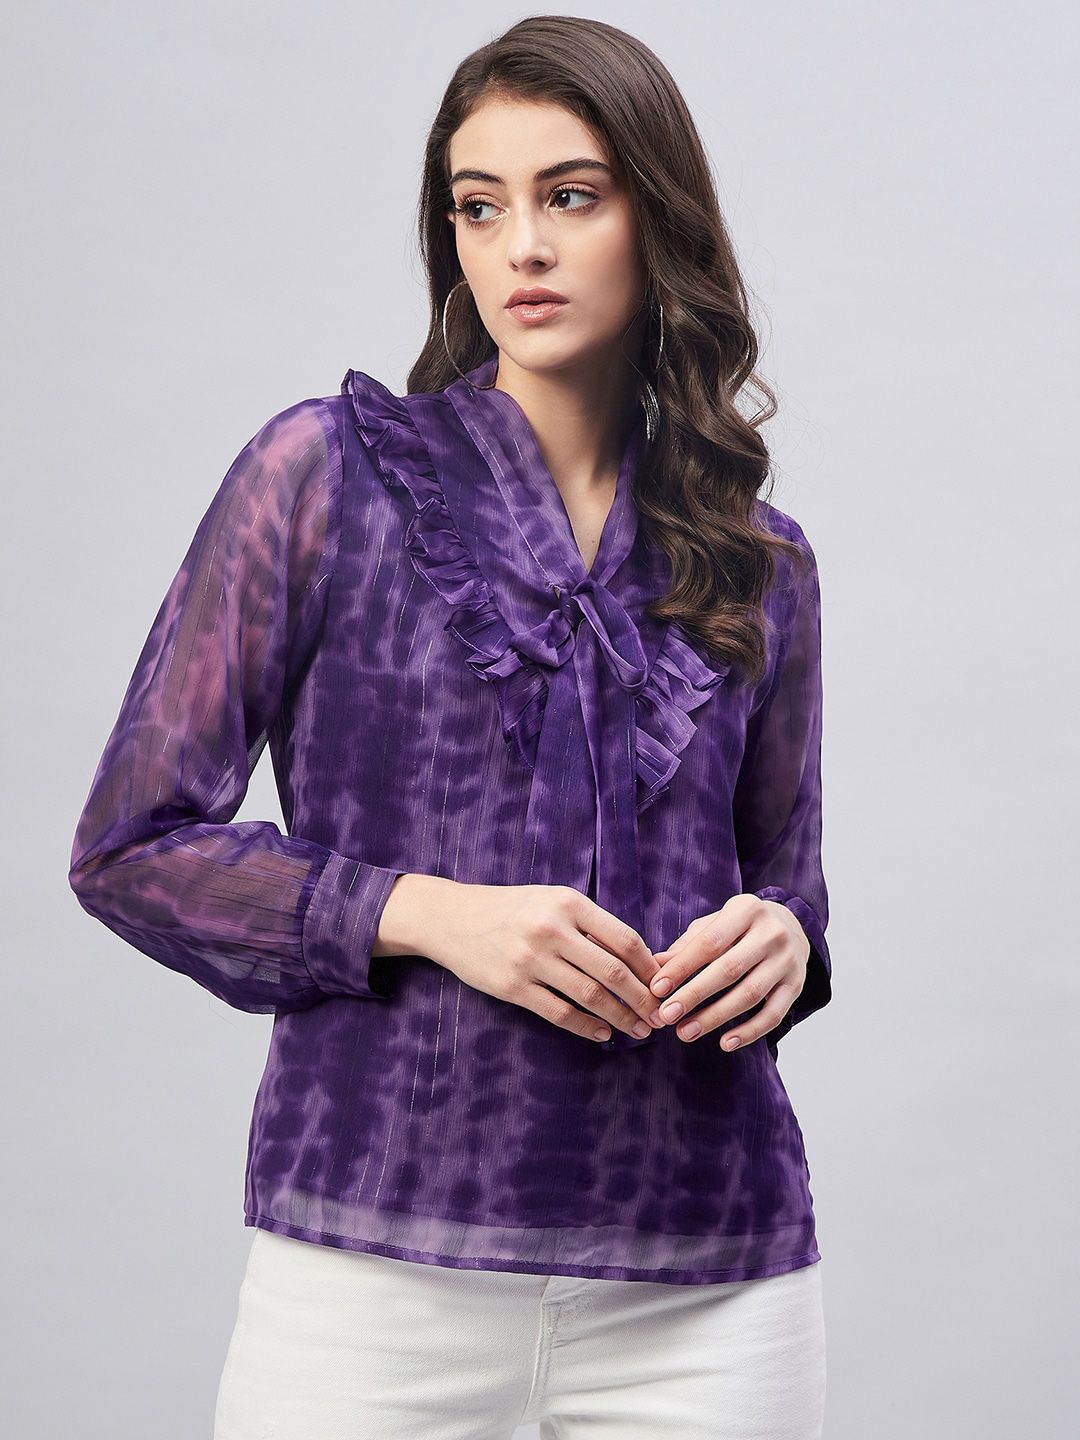 Marie Claire Tie and Dye Tie-Up Neck Ruffles Chiffon Top Price in India